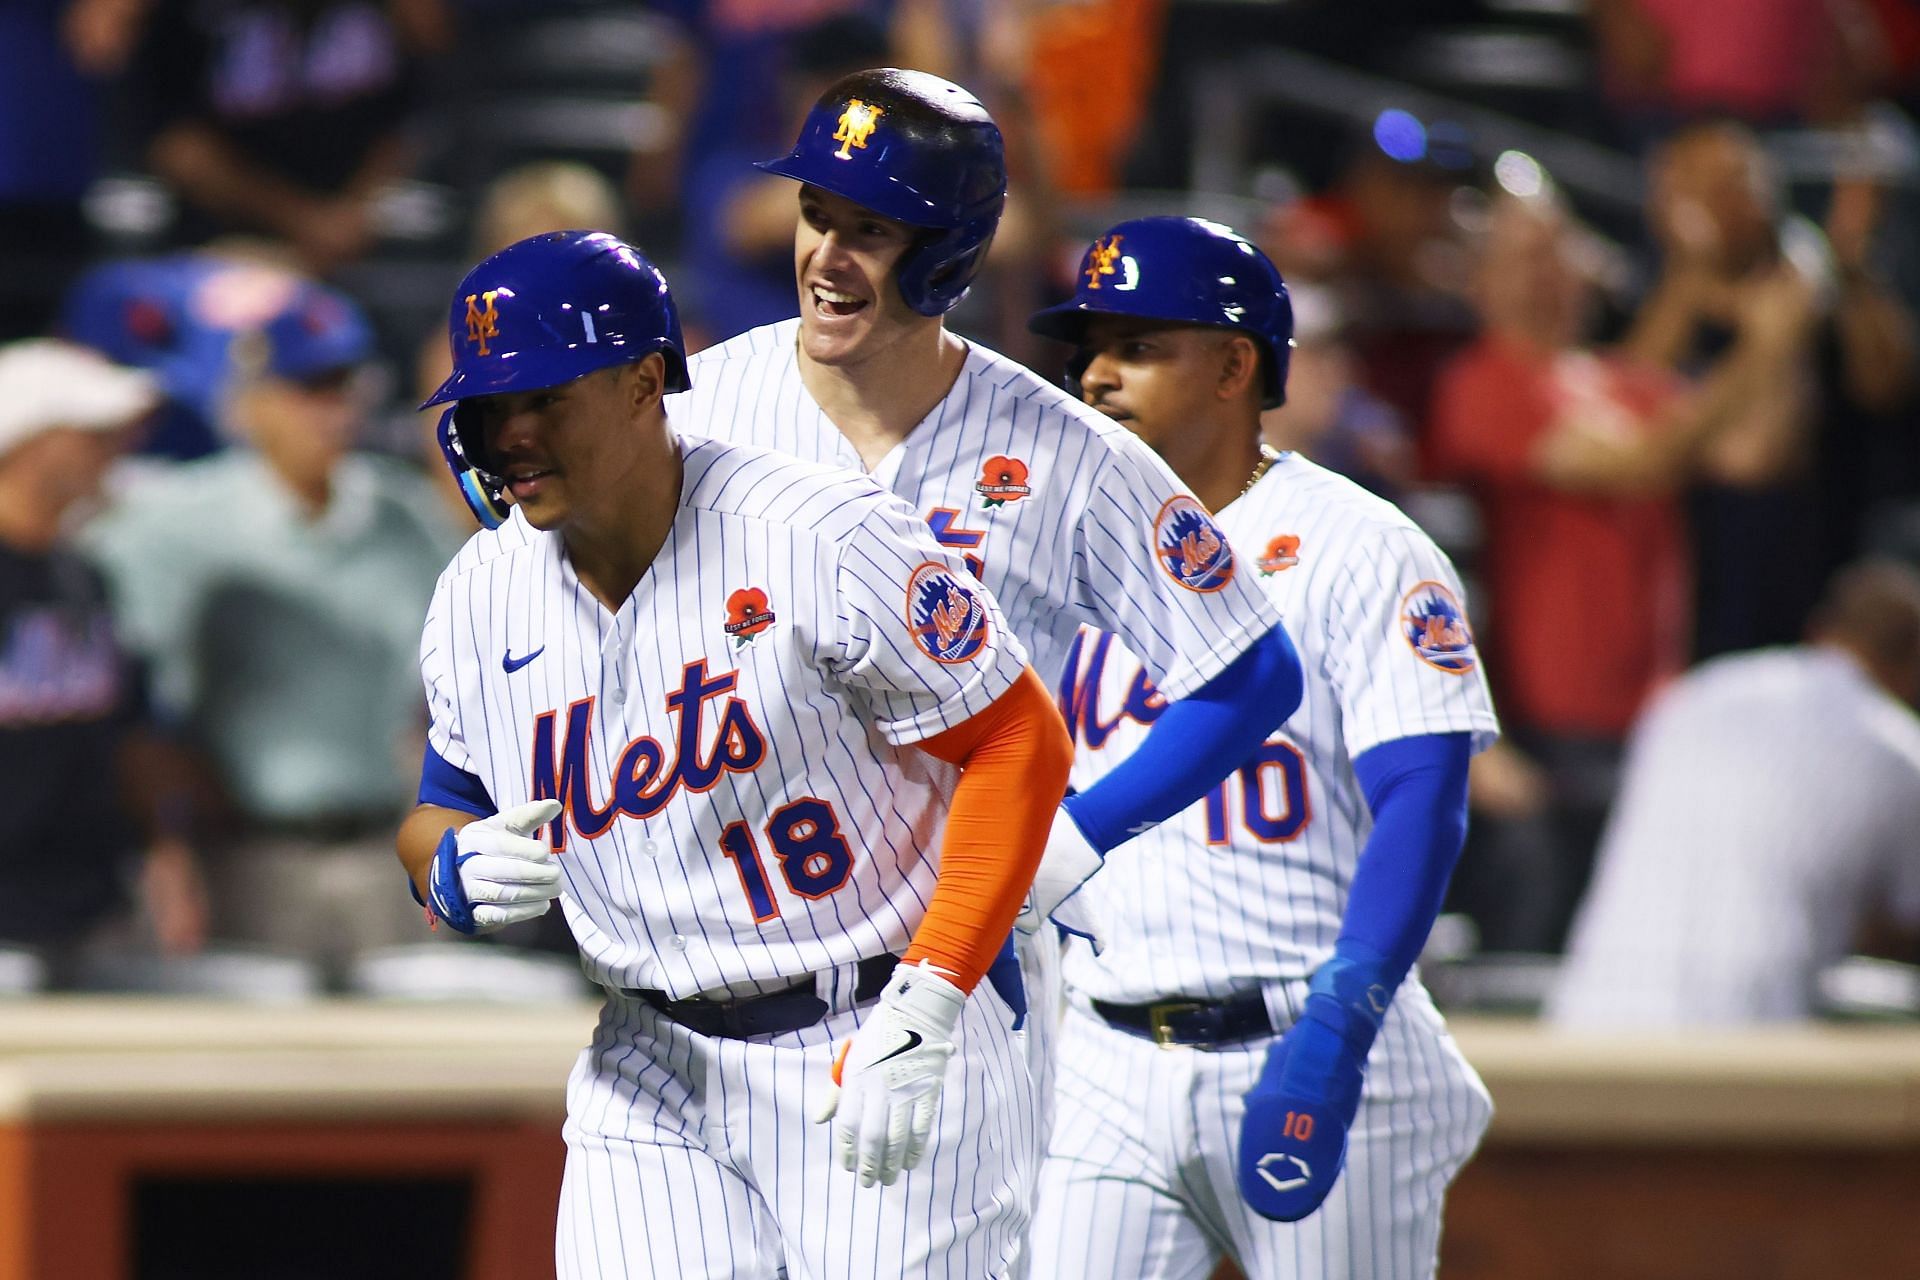 This Week in Mets: Where has the offense regressed the most since